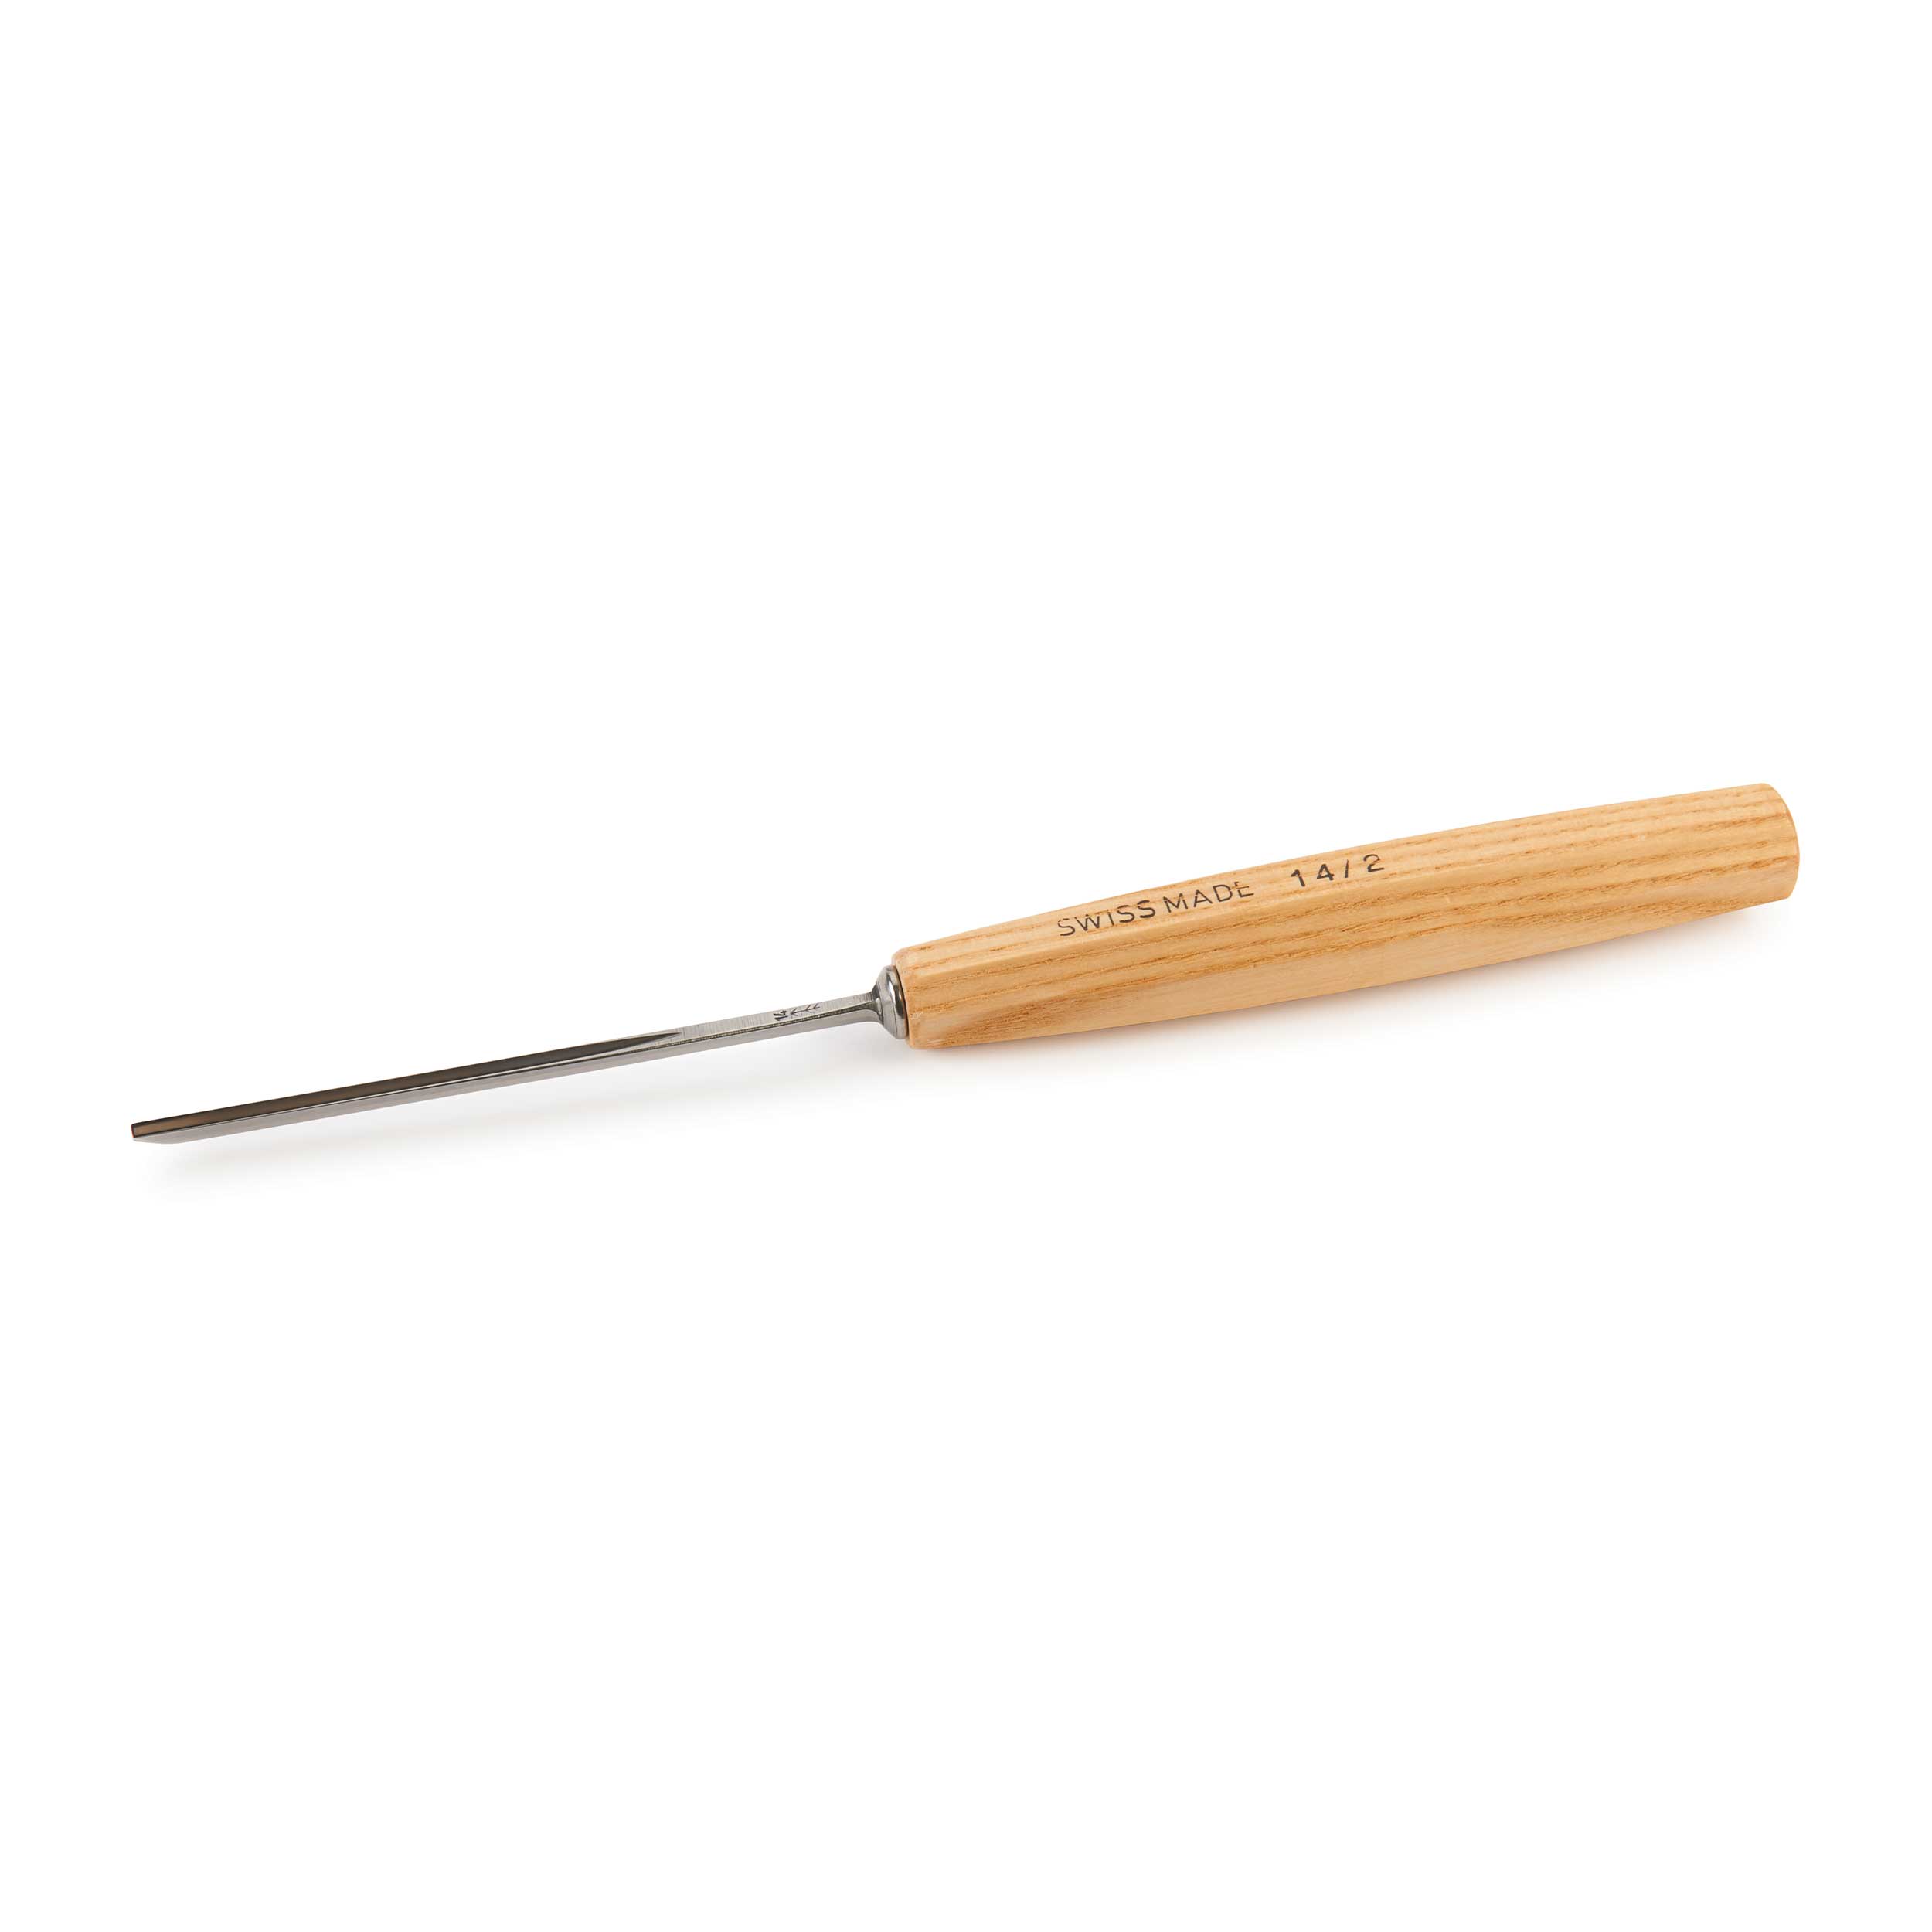 #14 Sweep V-parting Tool, 2 Mm, Full Size